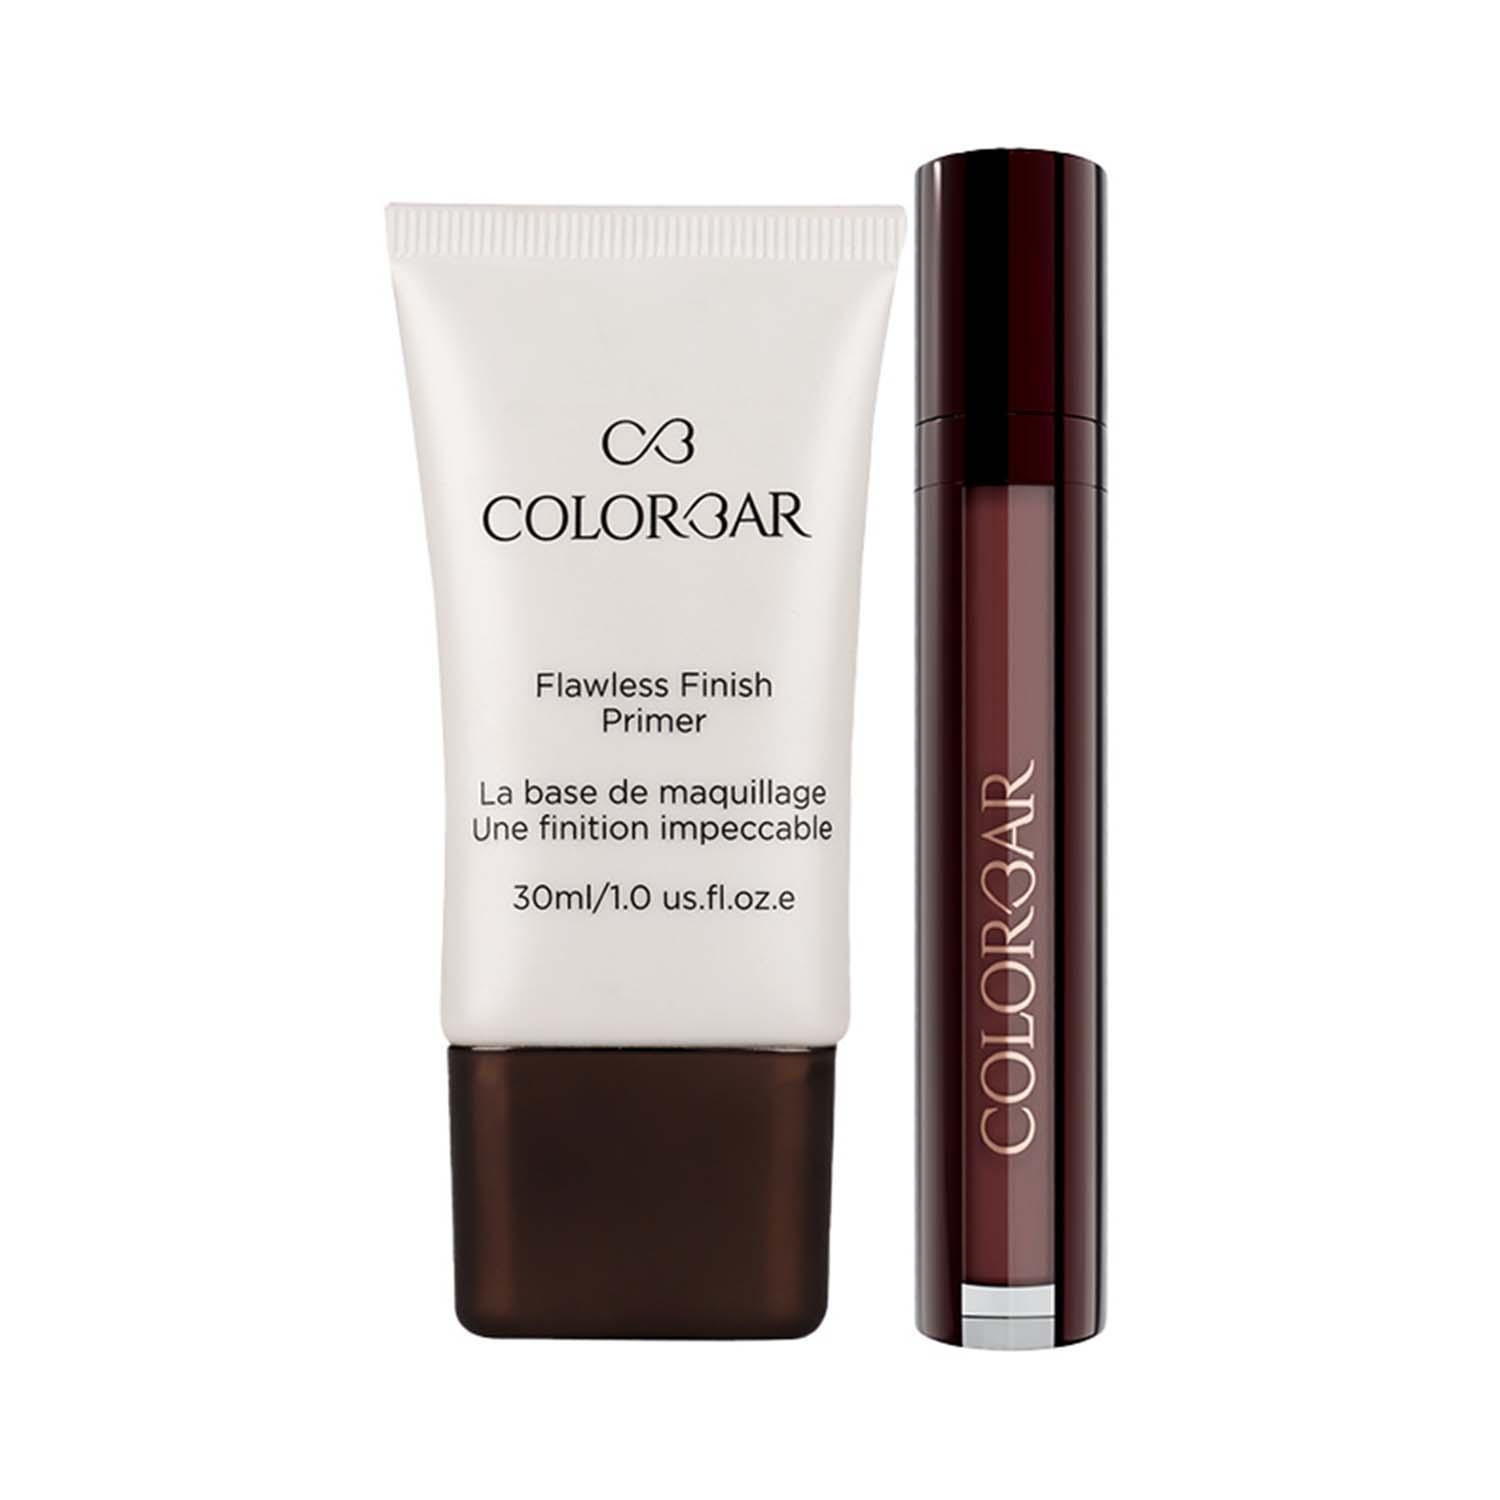 Colorbar | Colorbar Flawless Finish Primer + Kissproof Lipstain - Haute Latte 007 Combo